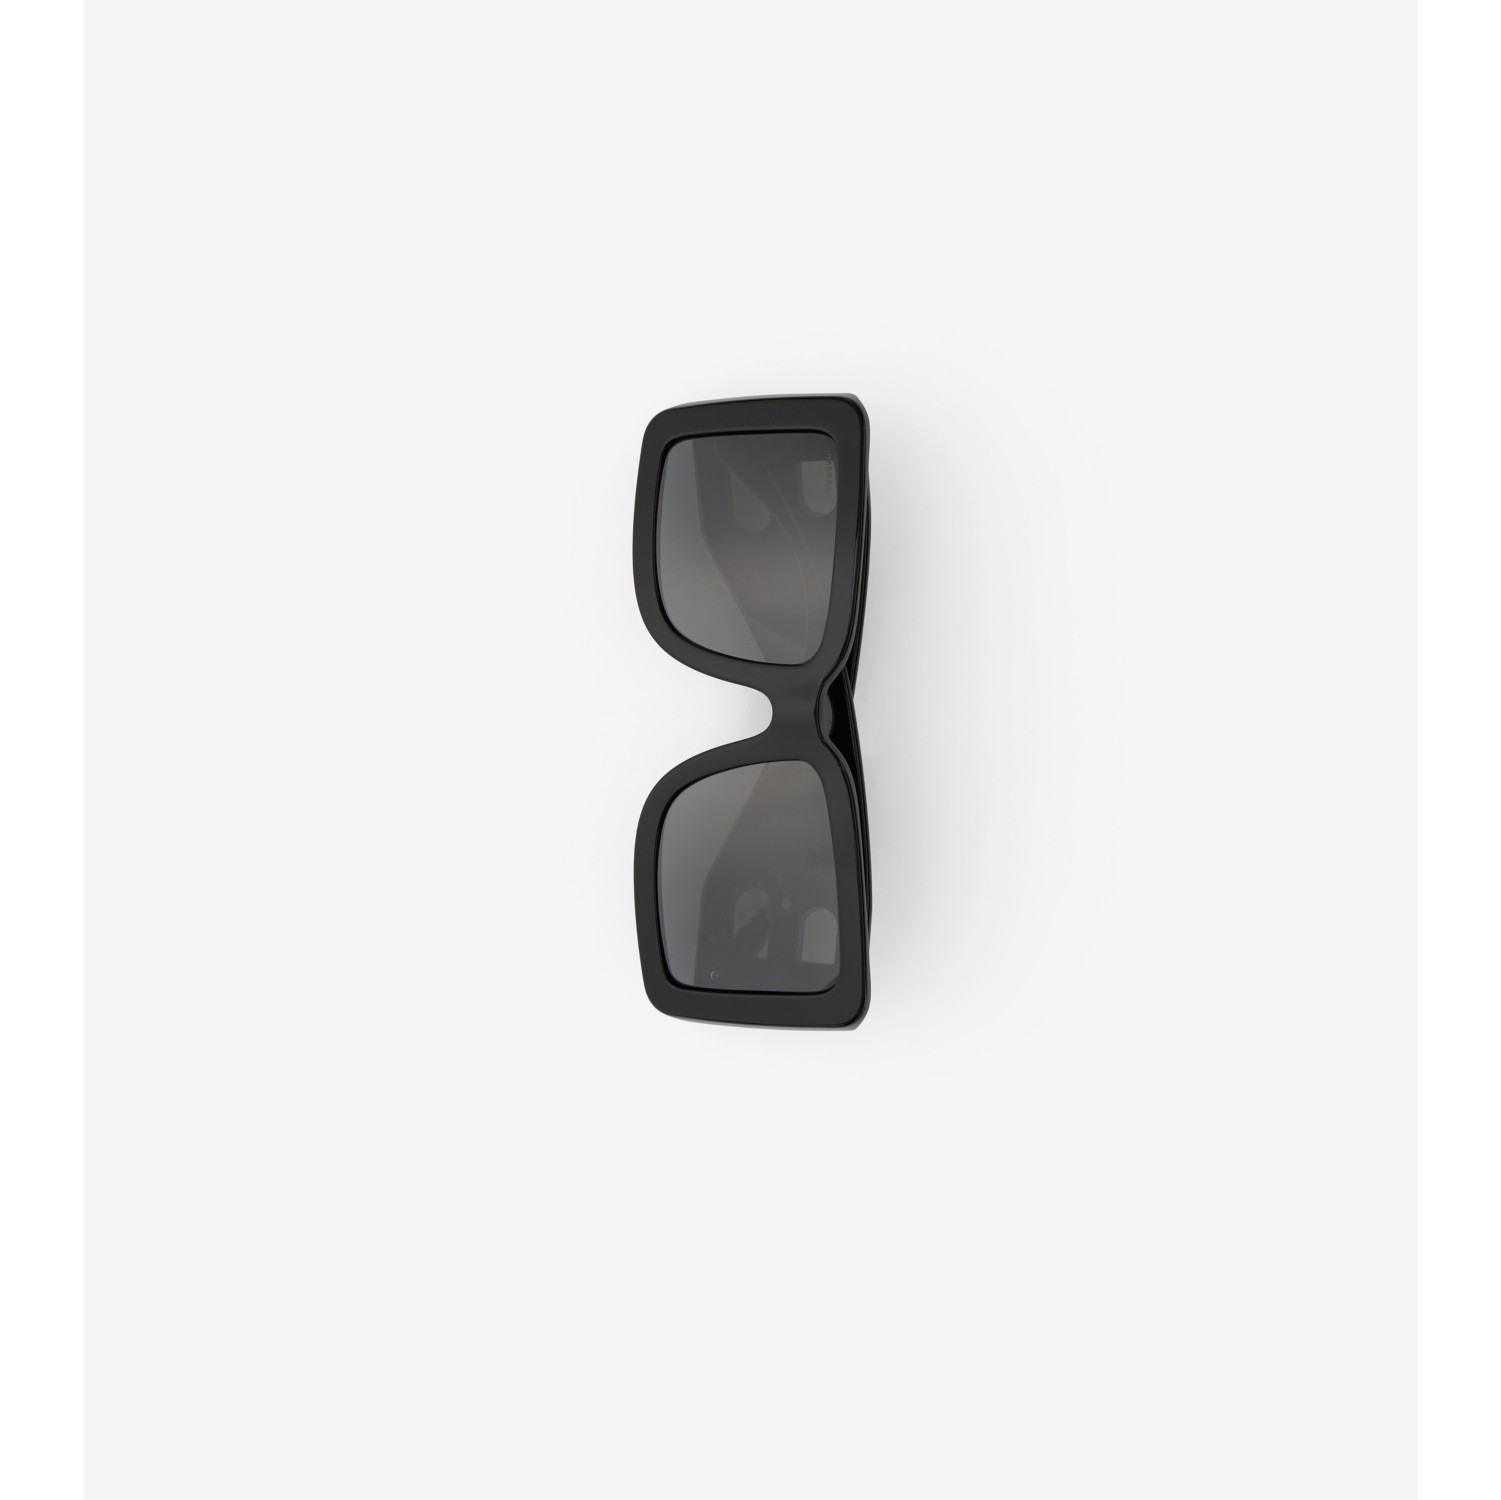 Square sunglasses with black frame and gold details